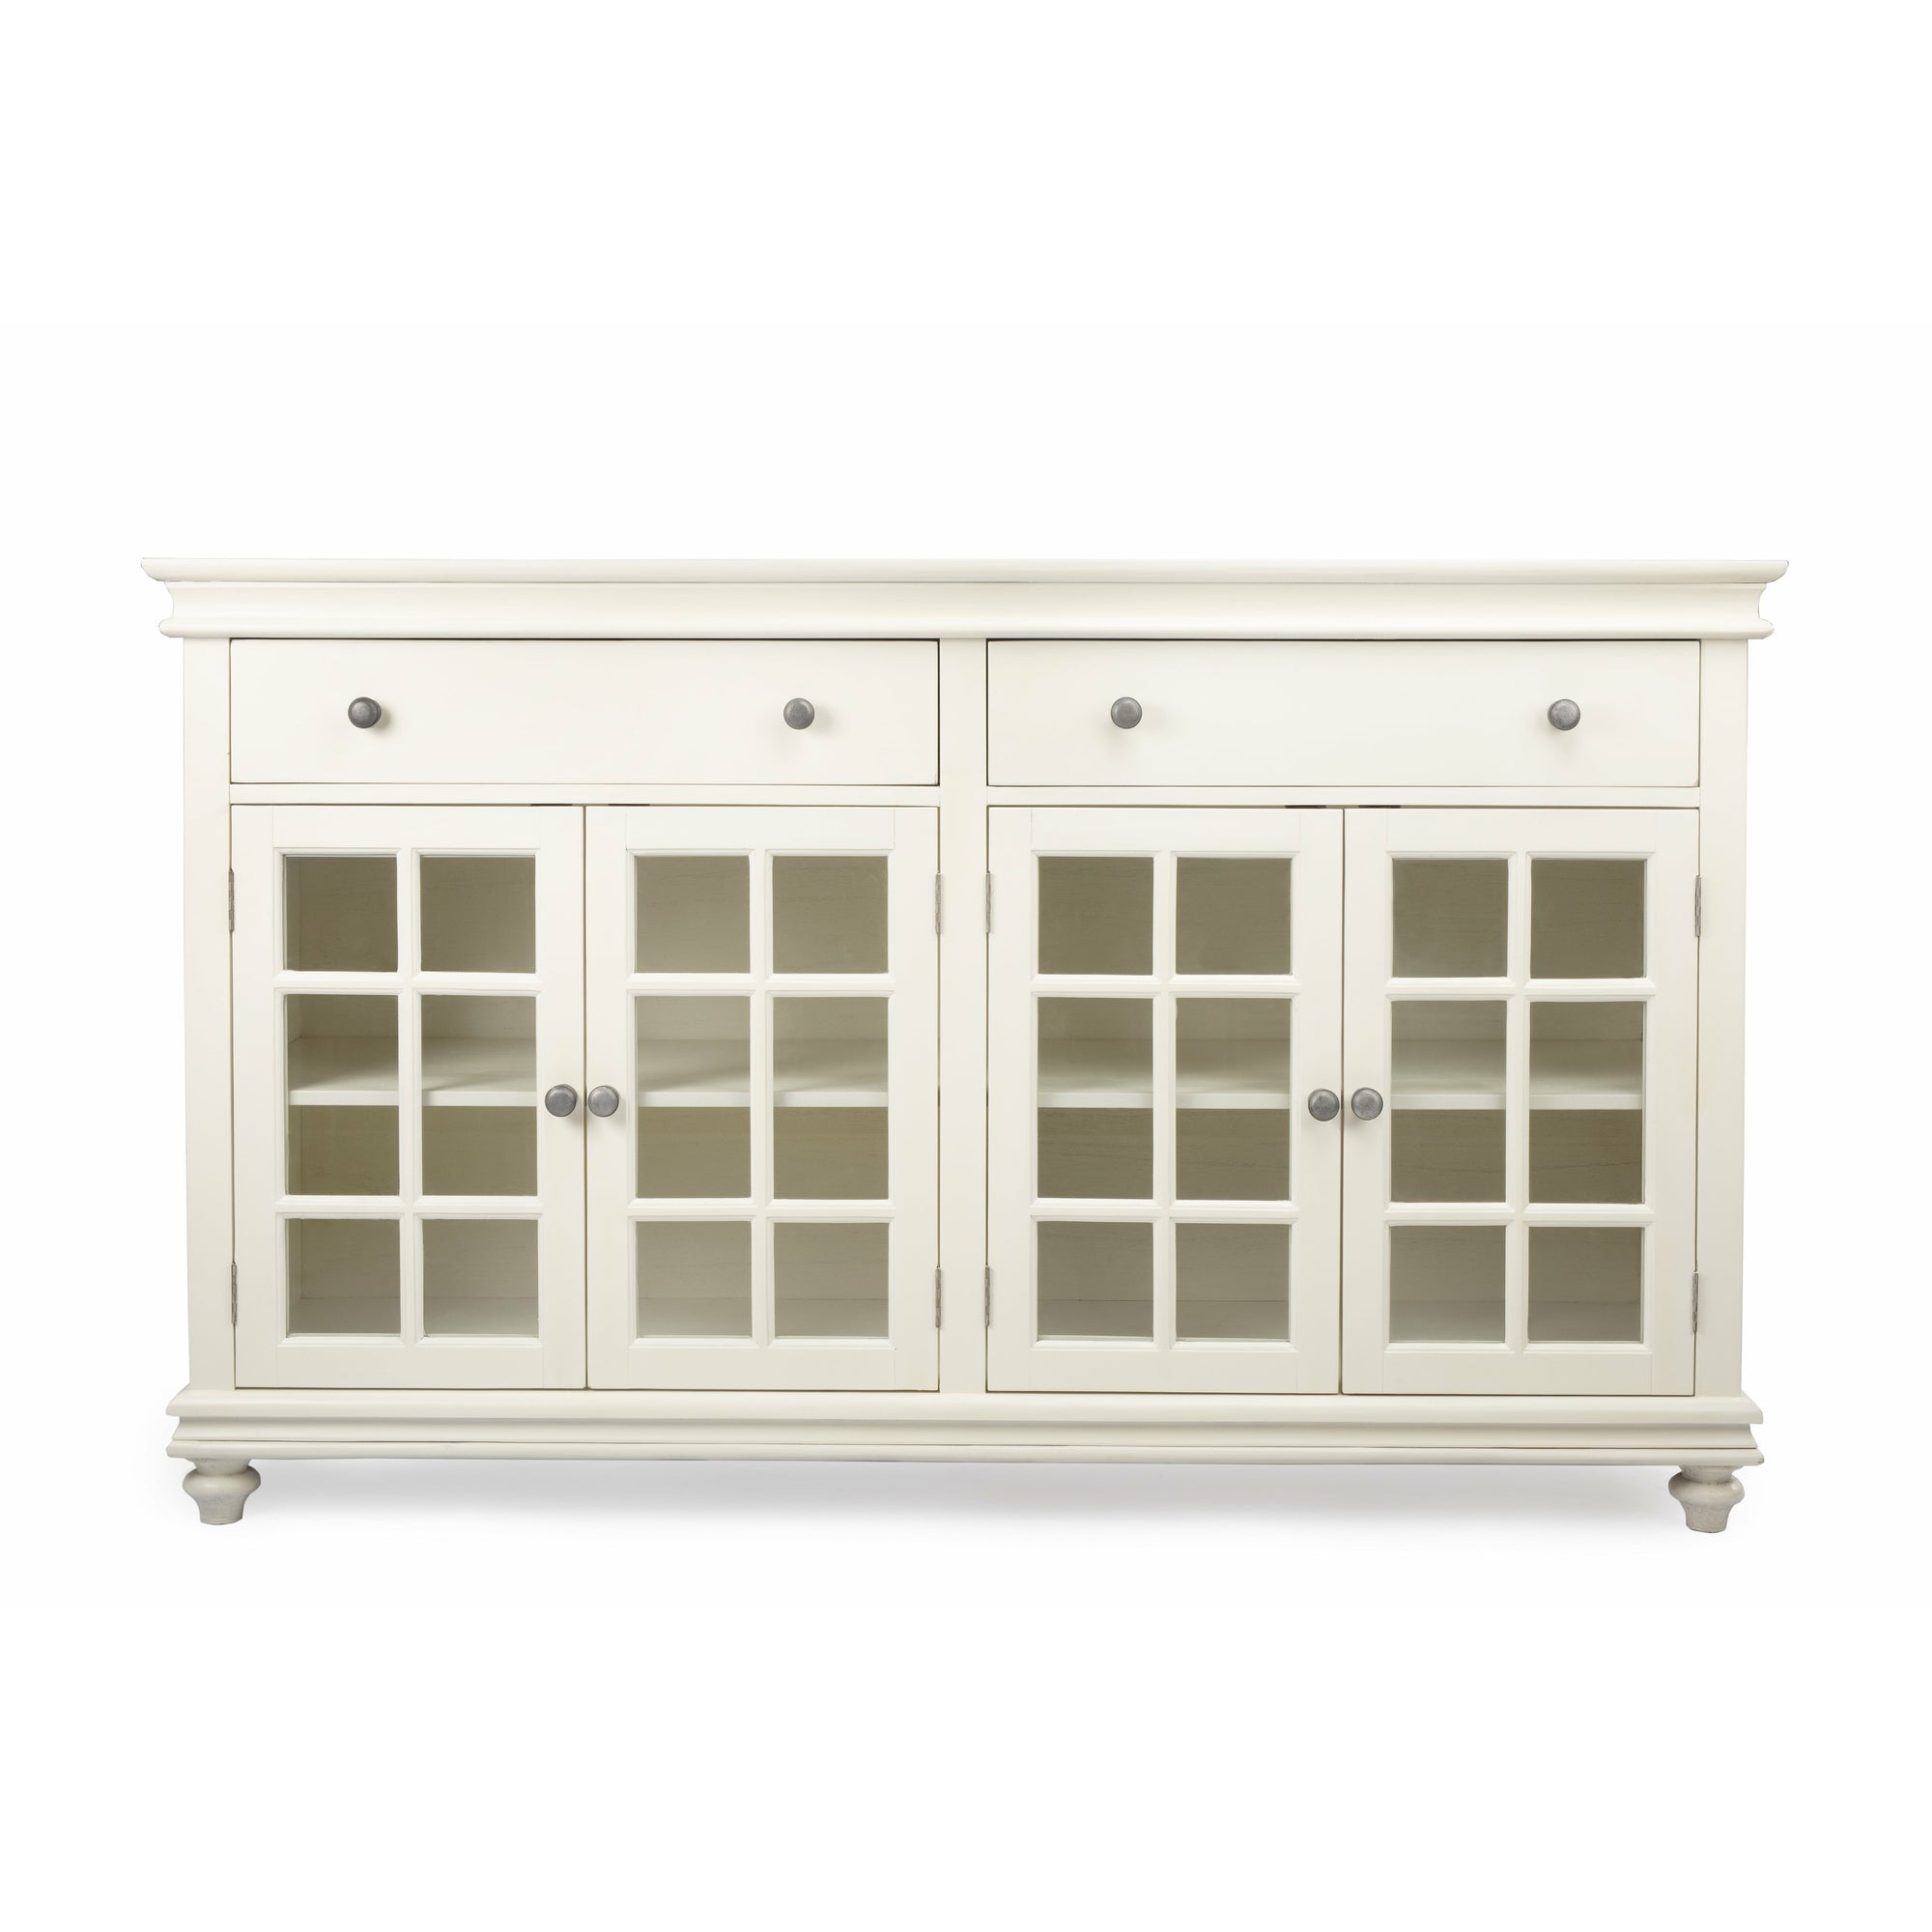 Butler Specialty Transitional Rectangular White Wood Sideboard Chests/Cabinets Butler Specialty